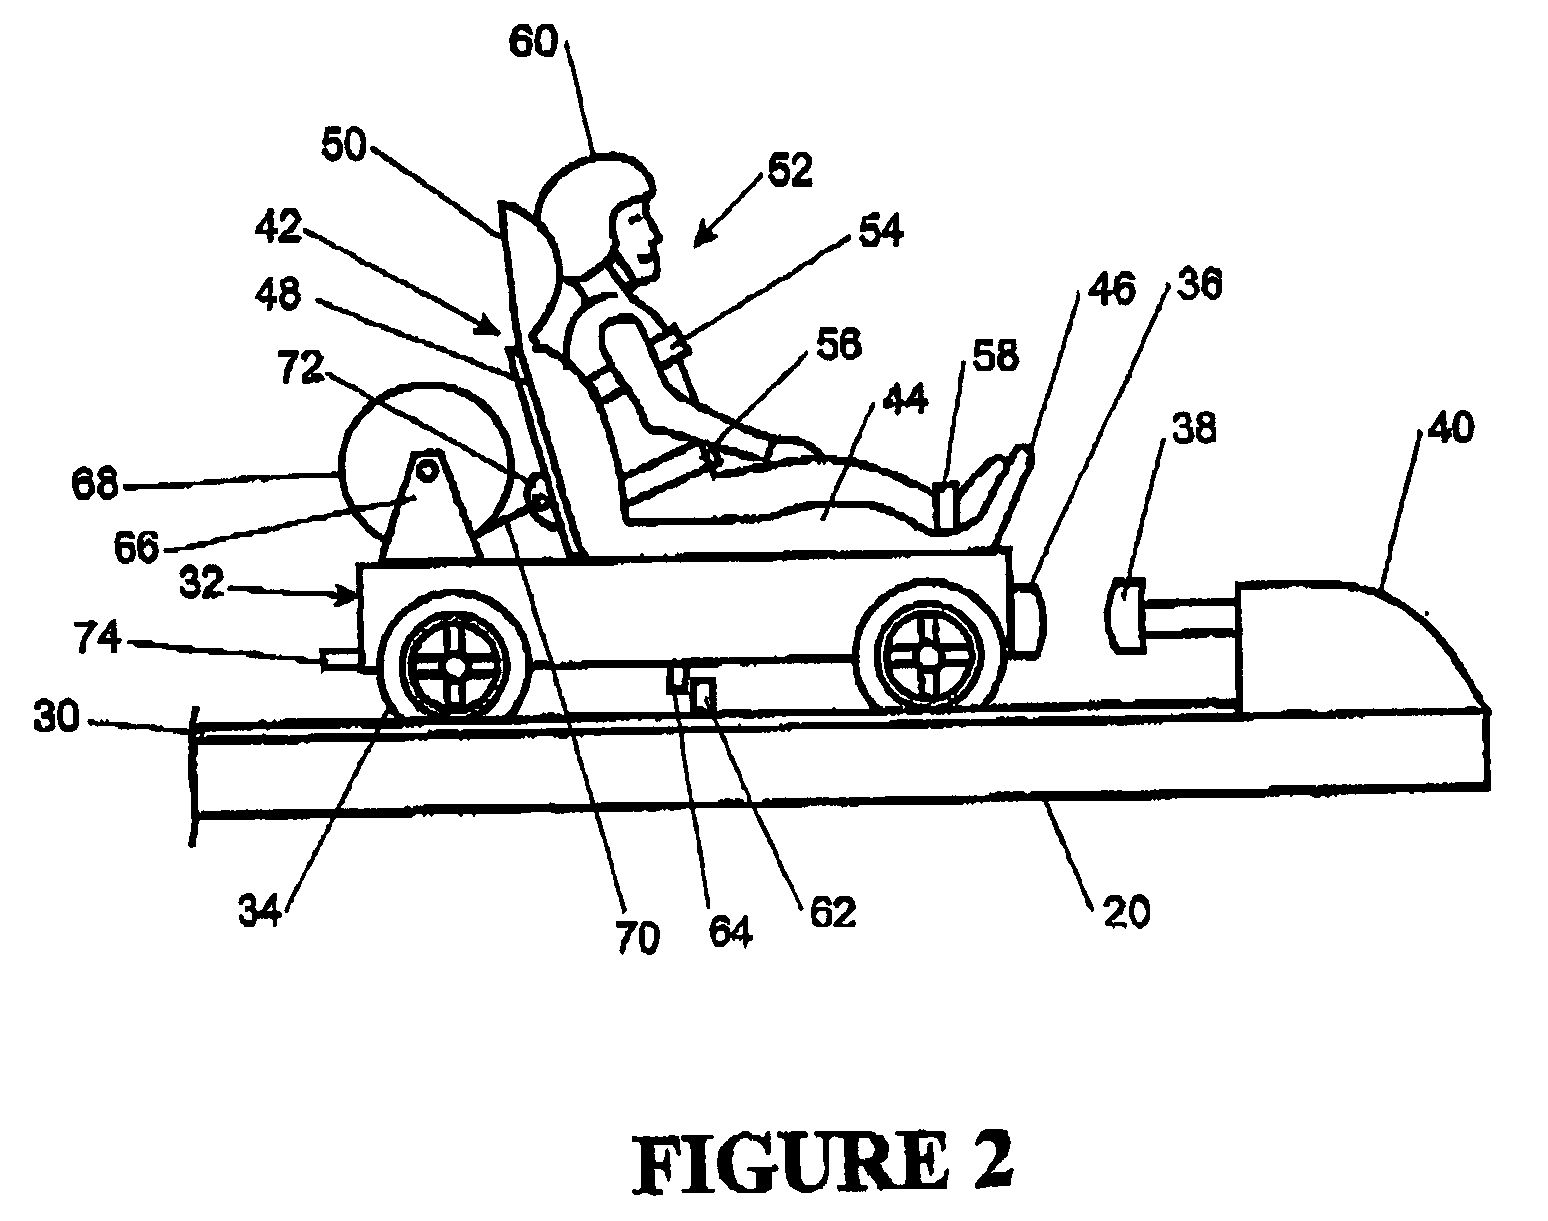 Apparatus for an amusement ride and fall